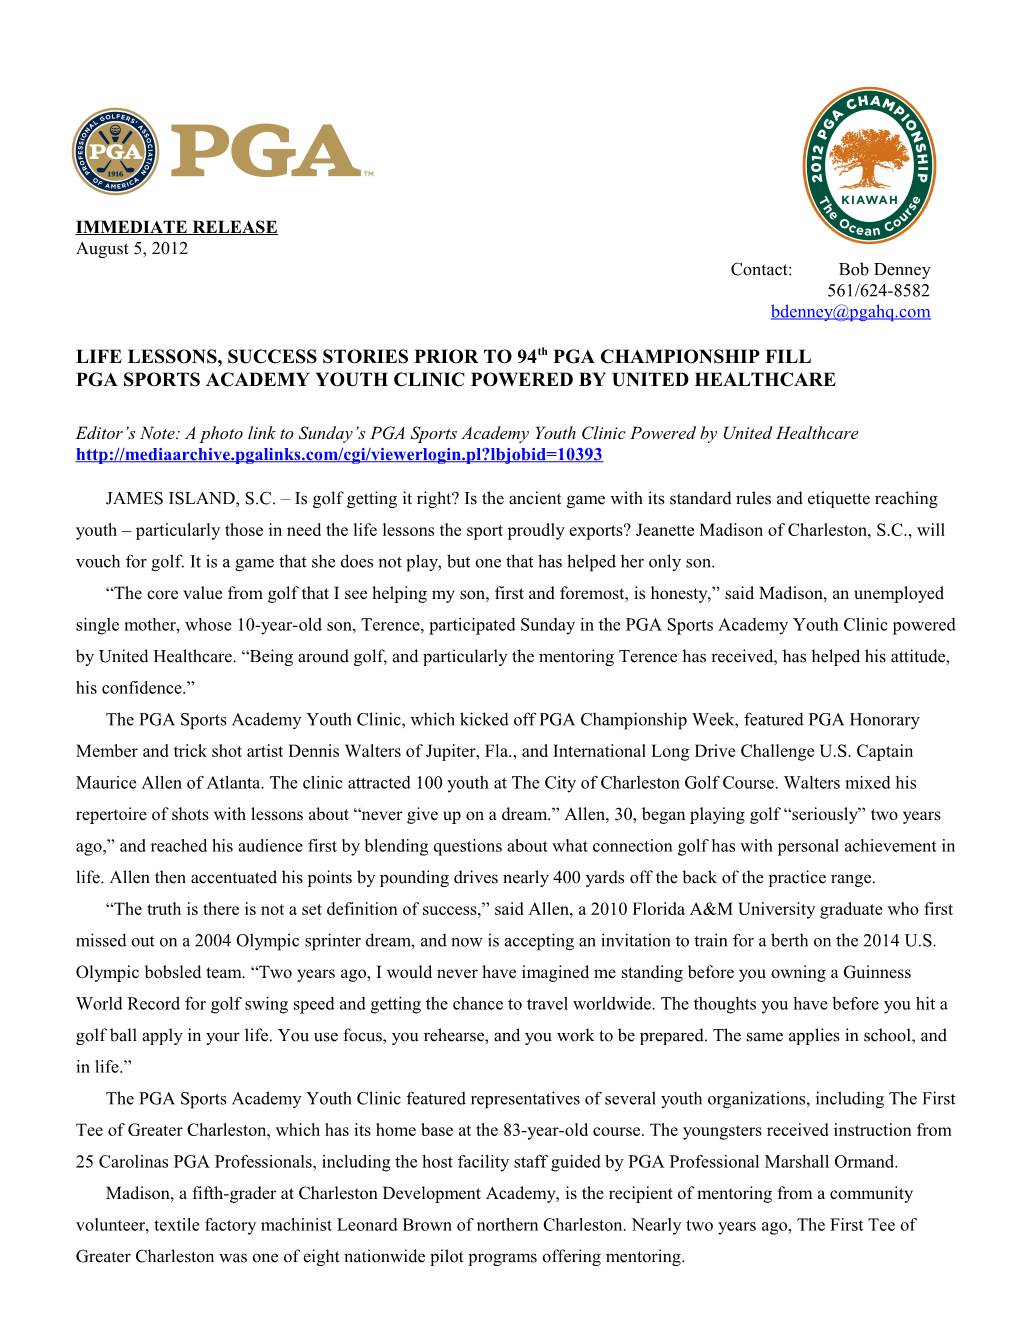 LIFE LESSONS, SUCCESS STORIES PRIOR to 94Th PGA CHAMPIONSHIP FILL